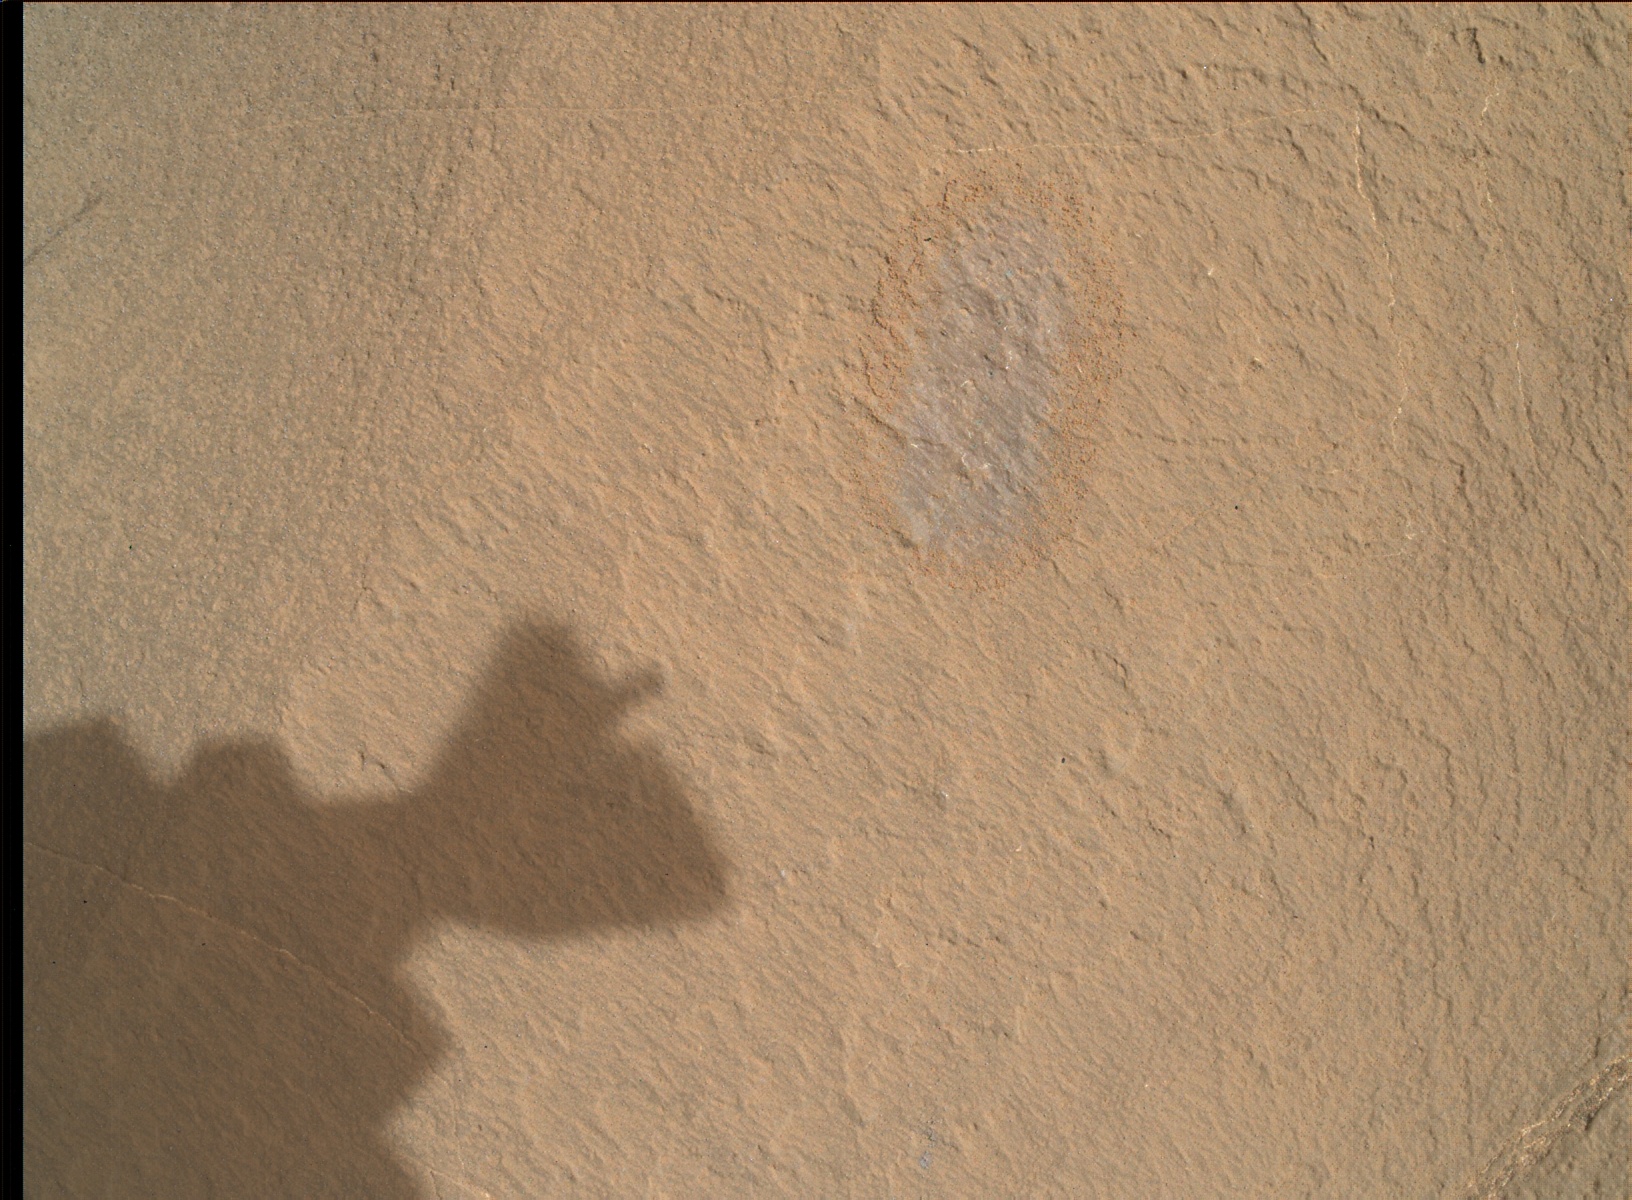 Nasa's Mars rover Curiosity acquired this image using its Mars Hand Lens Imager (MAHLI) on Sol 1418